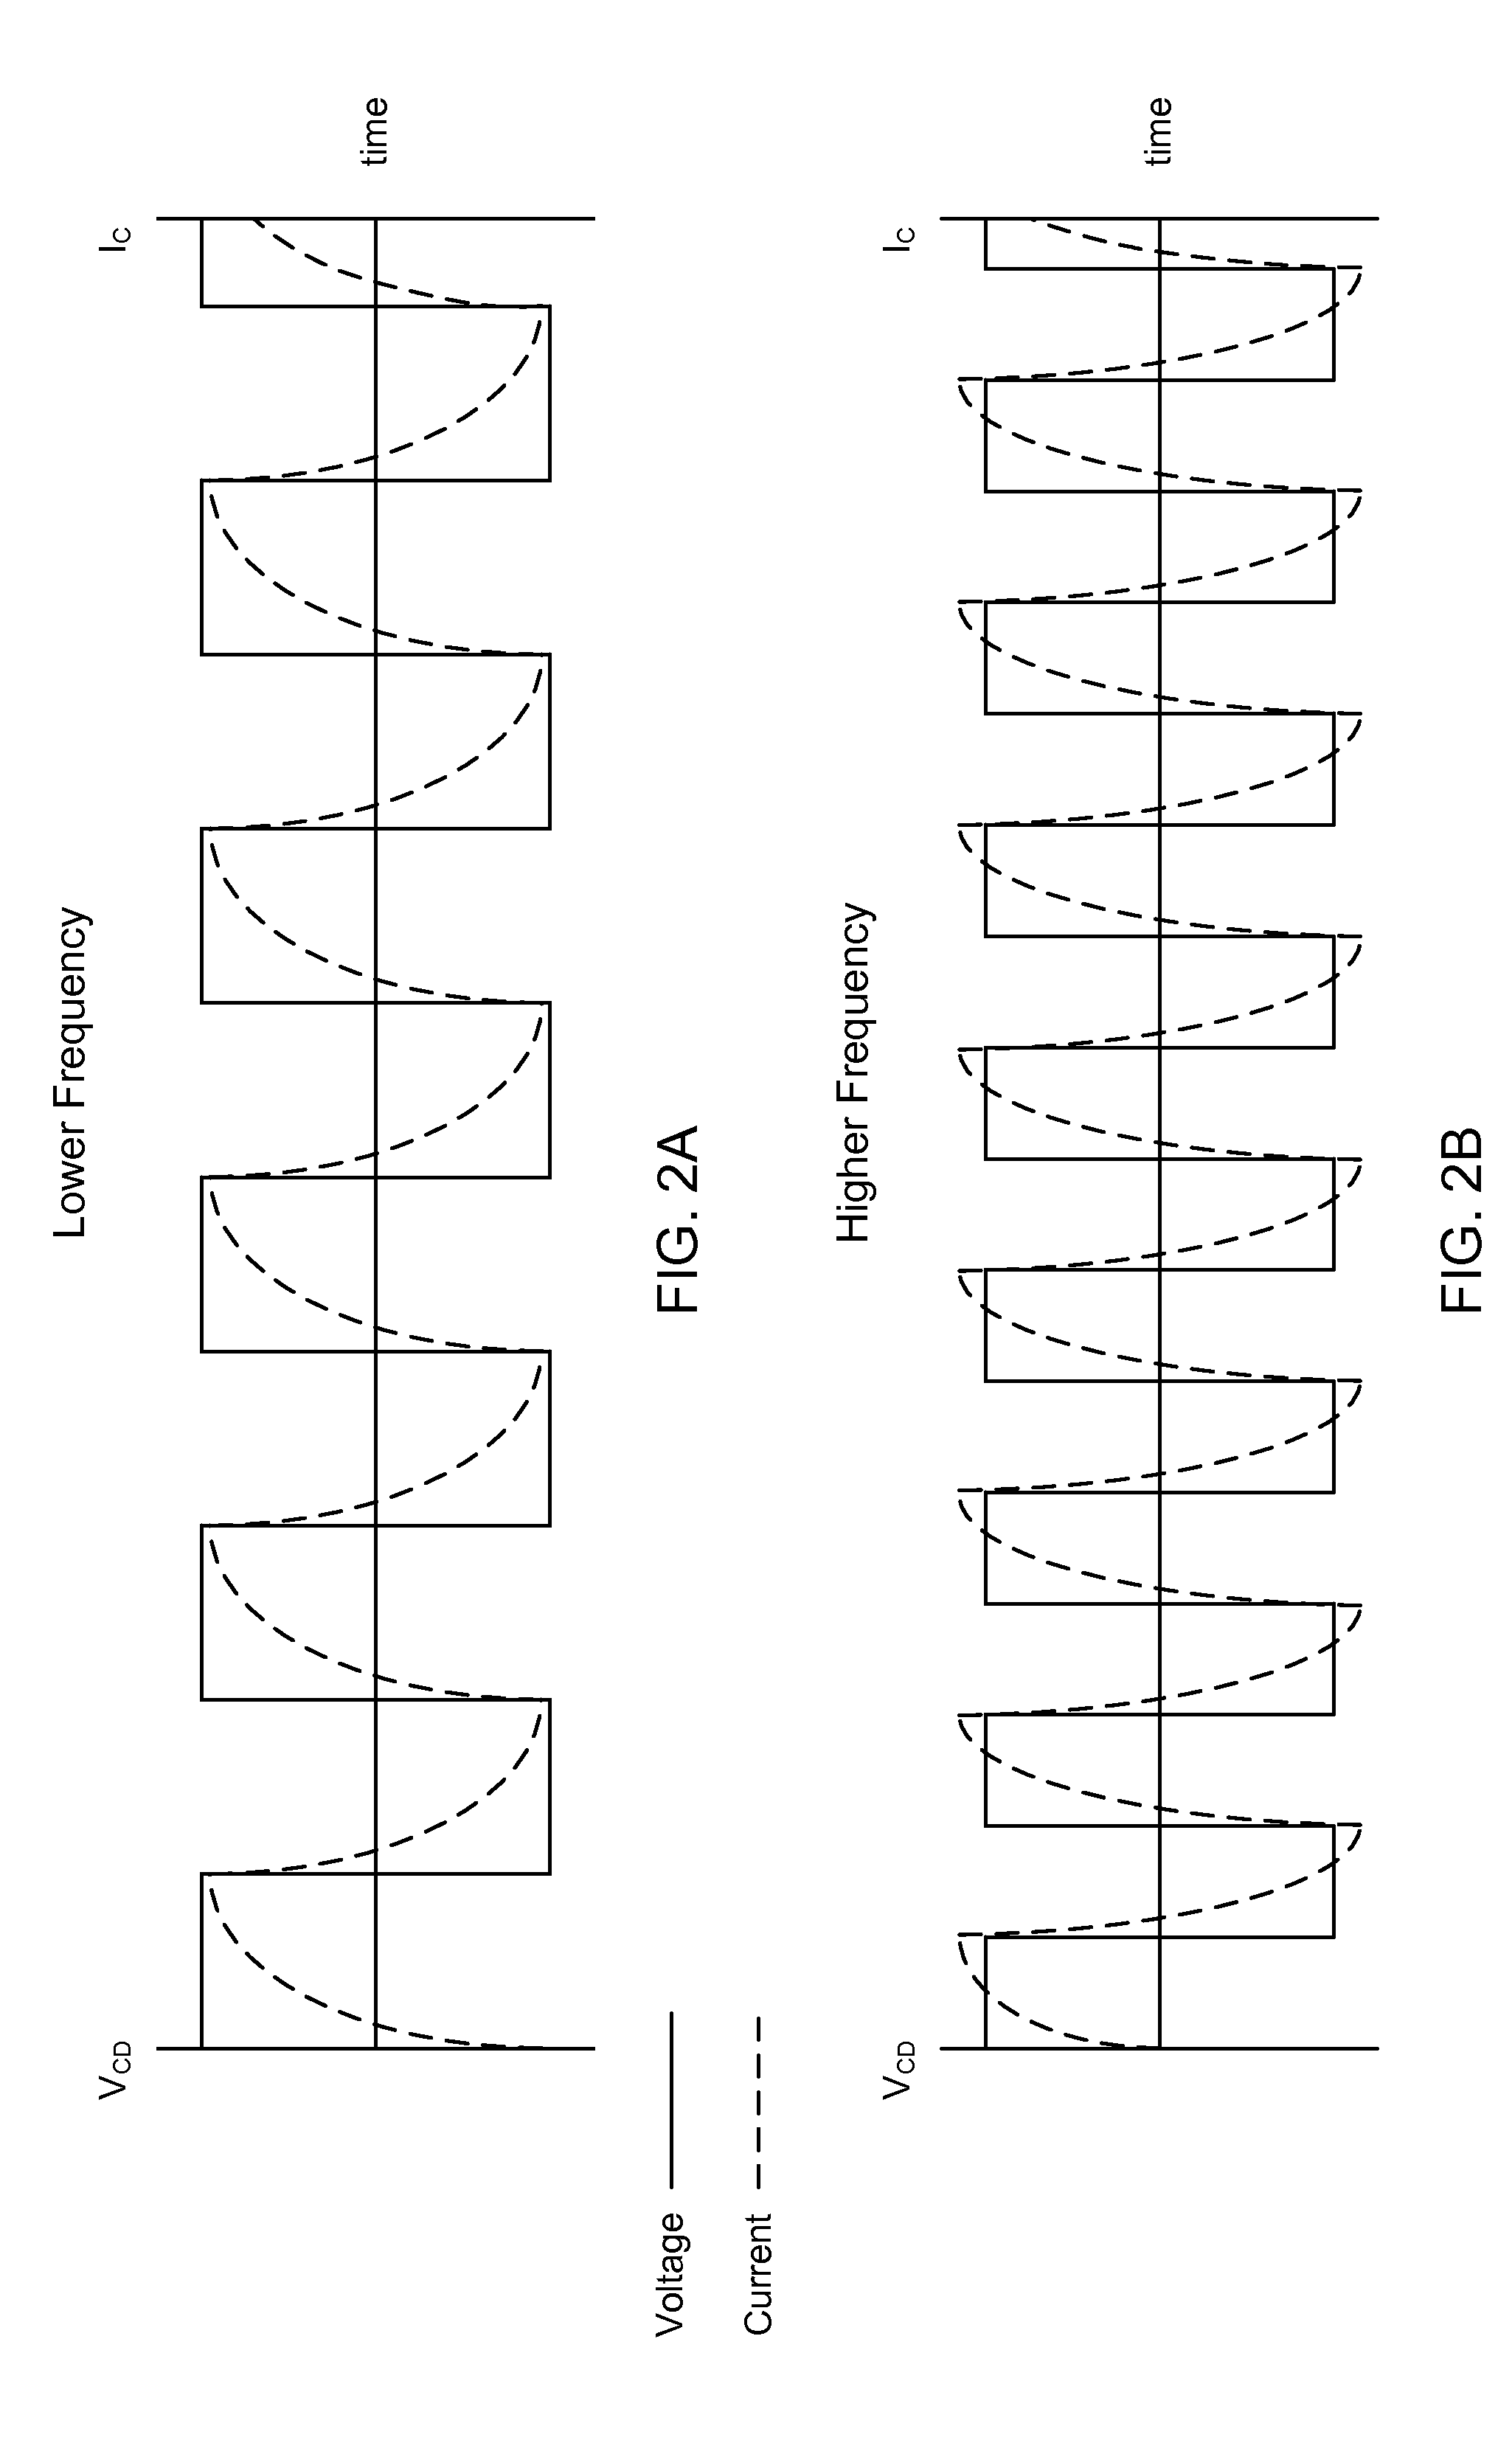 Differing boost voltages applied to two or more anodeless electrodes for plasma processing